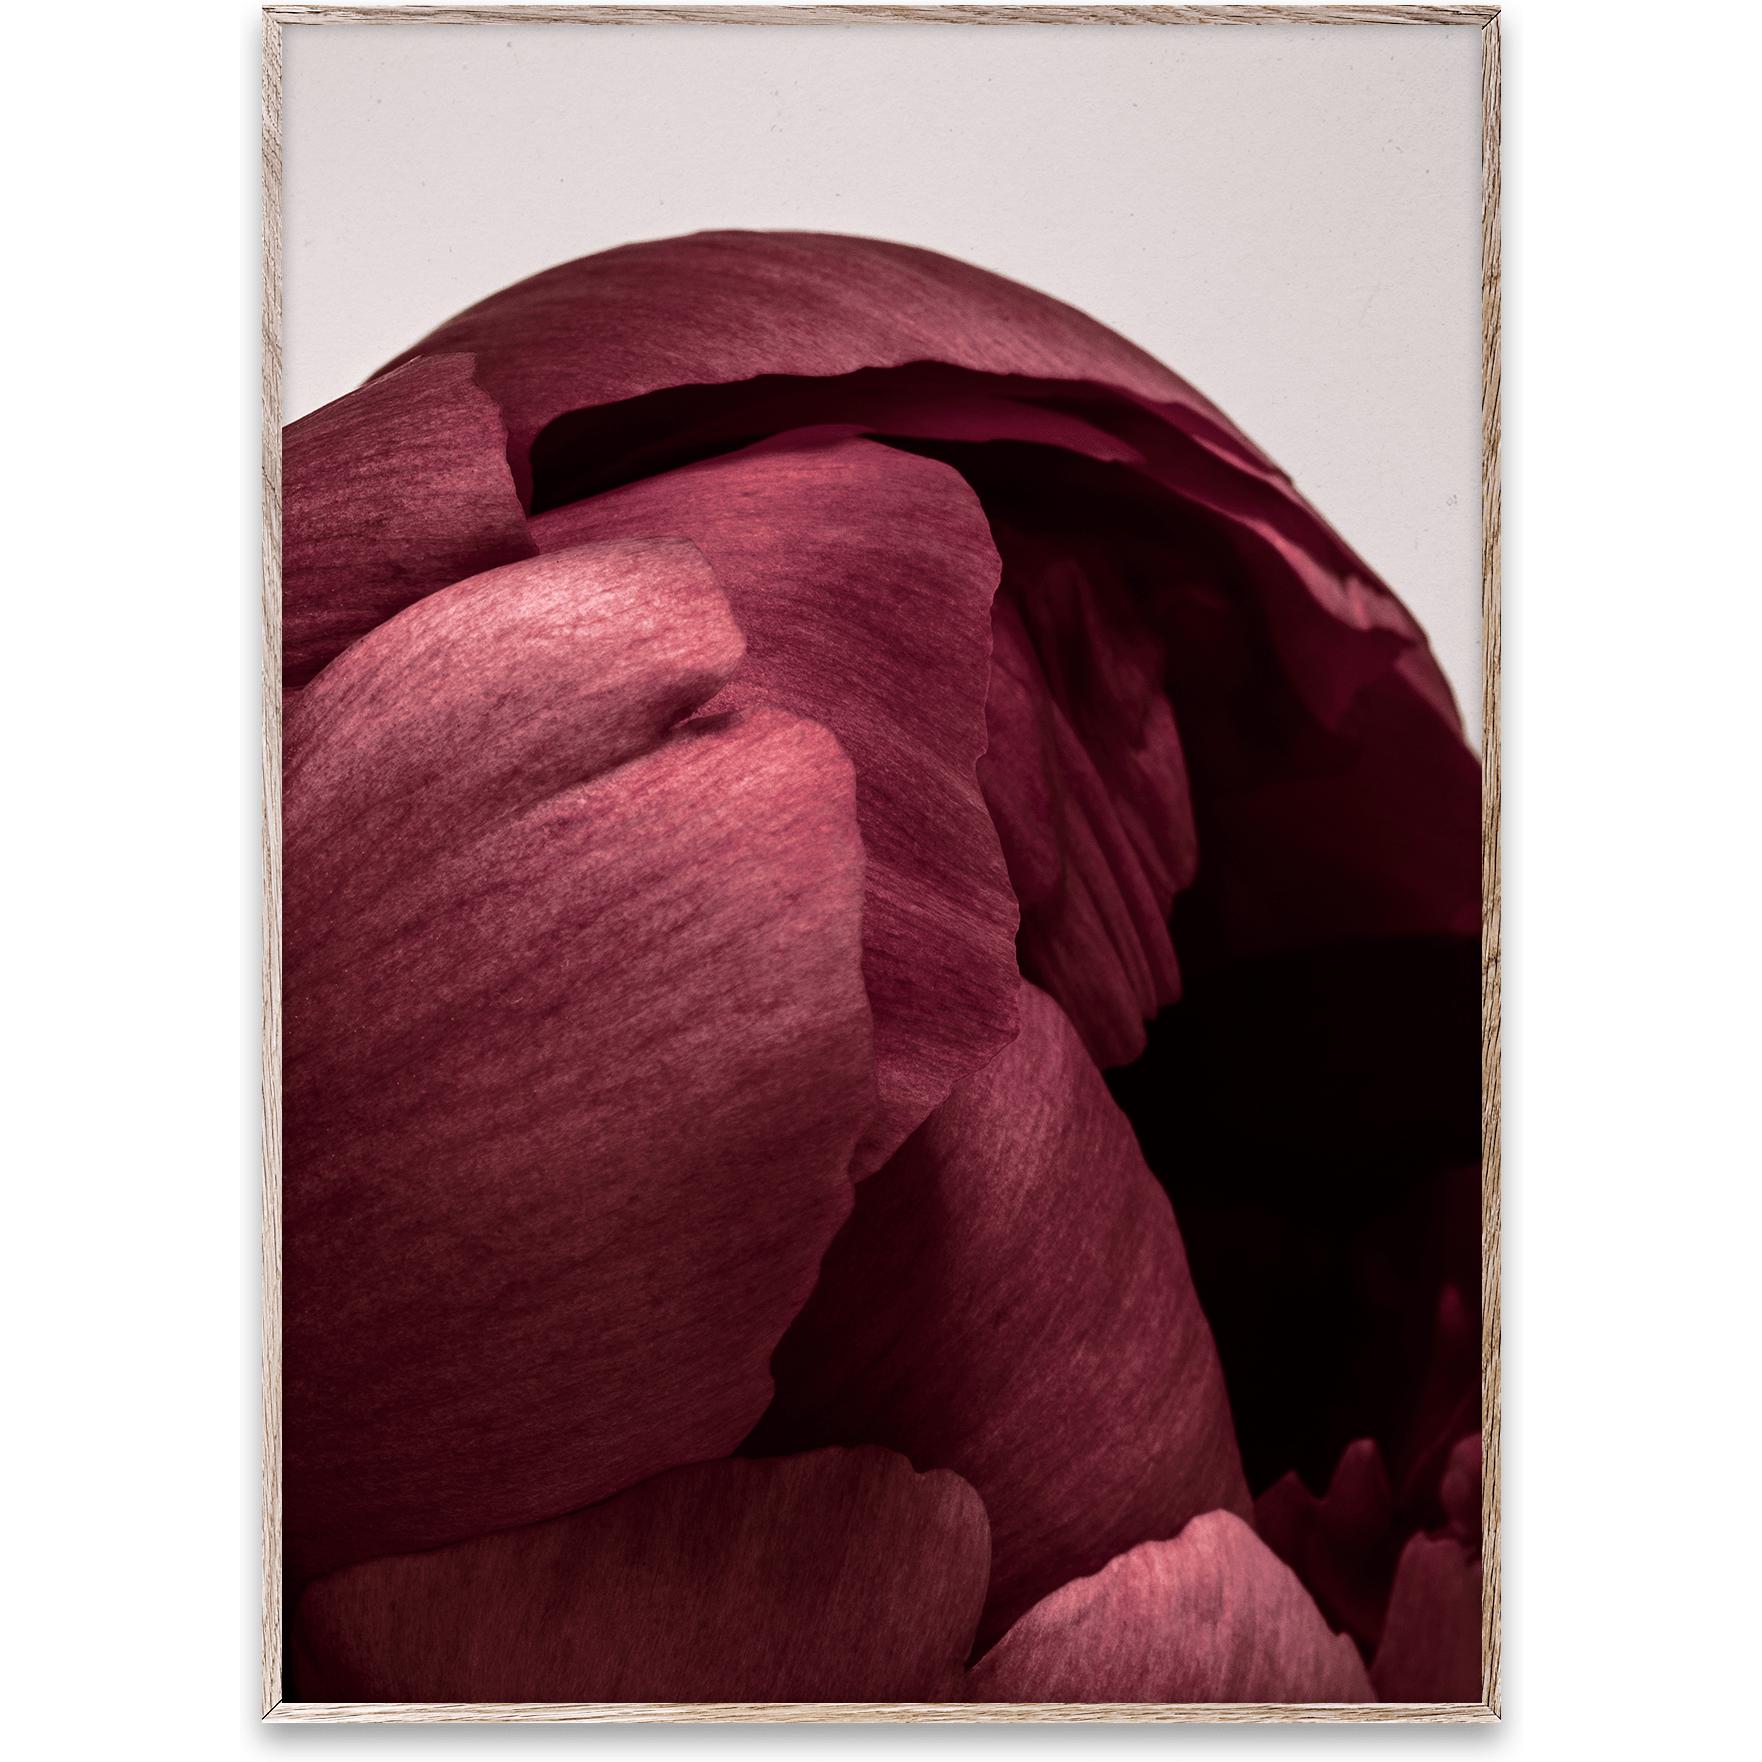 Paper Collective Peonia 01 Affiche, 30x40 cm